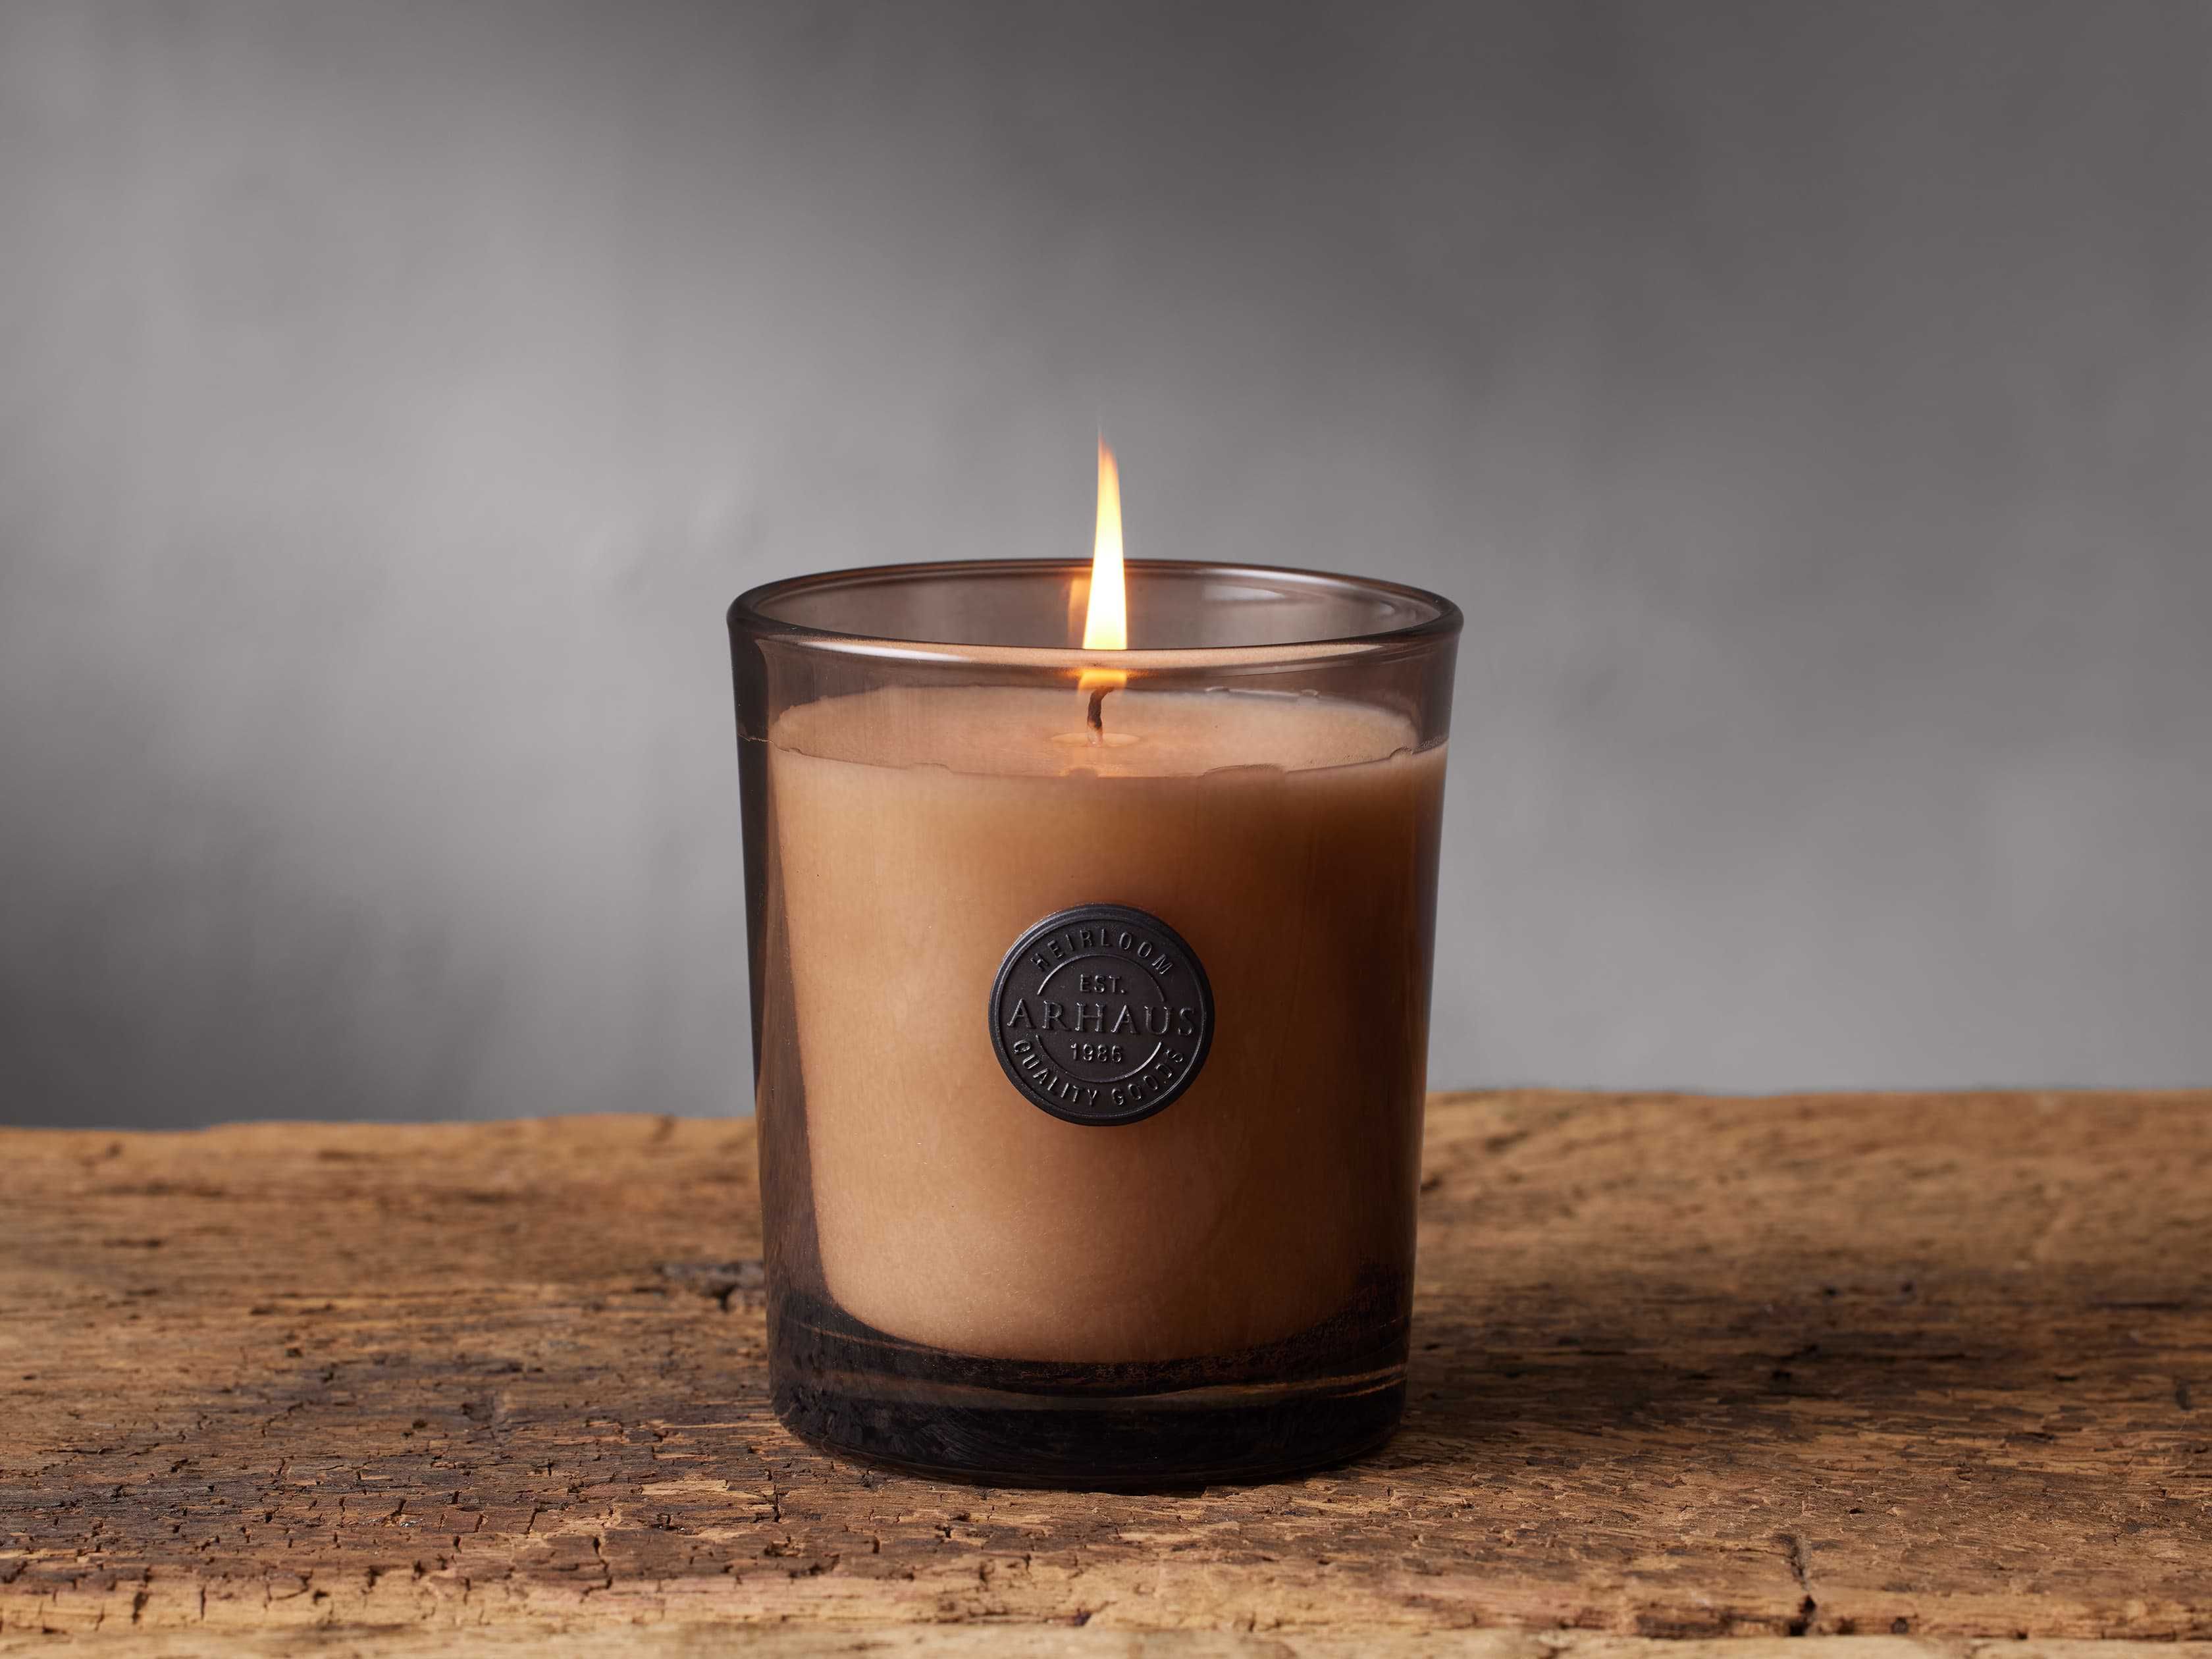 Signature Candle in Sandalwood Leaf and Tobacco | Arhaus